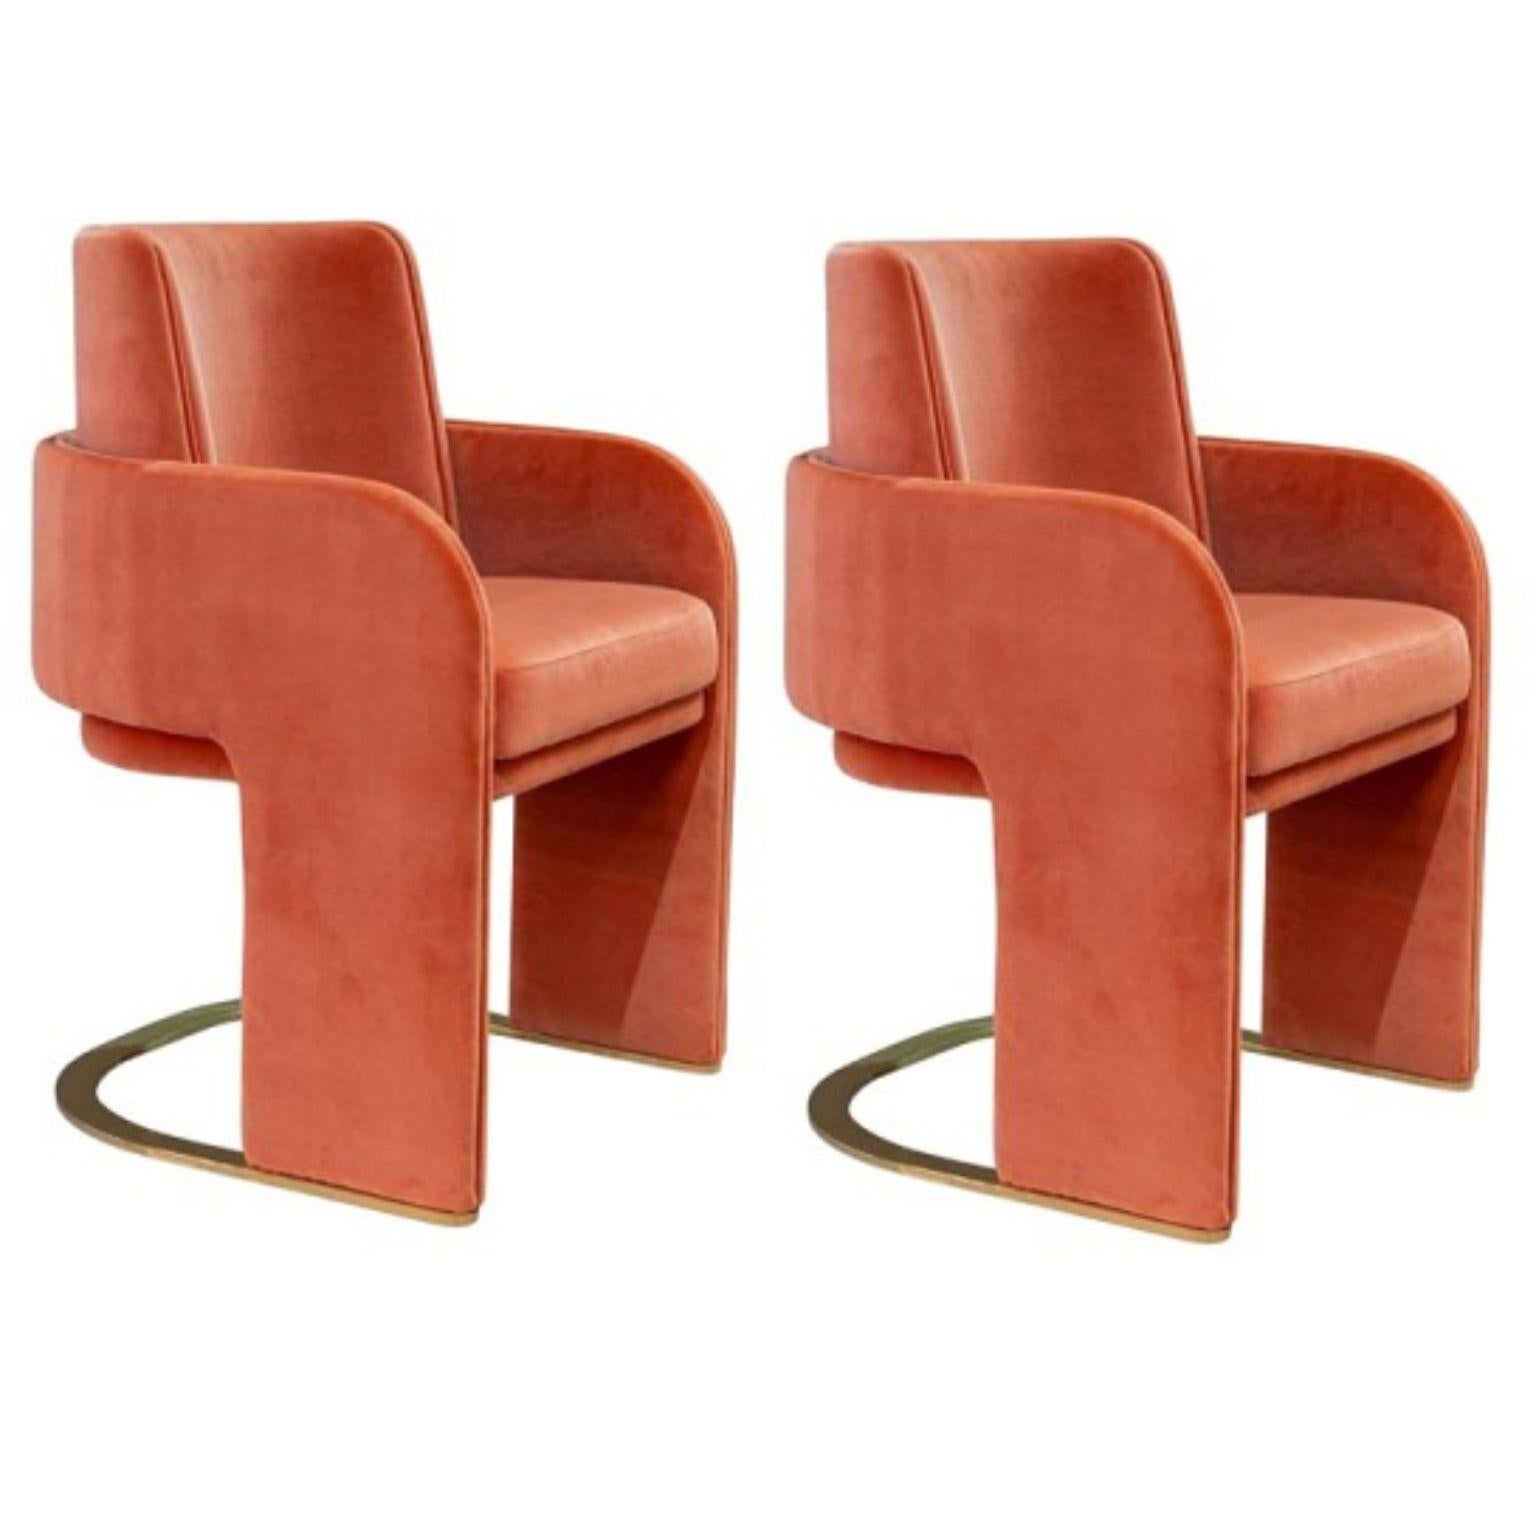 Set of 2 Odisseia chairs by Dooq
Dimensions
W 54 x D 55 x H 85 x Seat H 48 cm

Materials & Finishes
Base and feet in stainless steel plated polished or satin: brass, copper or nickel. Upholstery: seat, armrests and back fully upholstered in